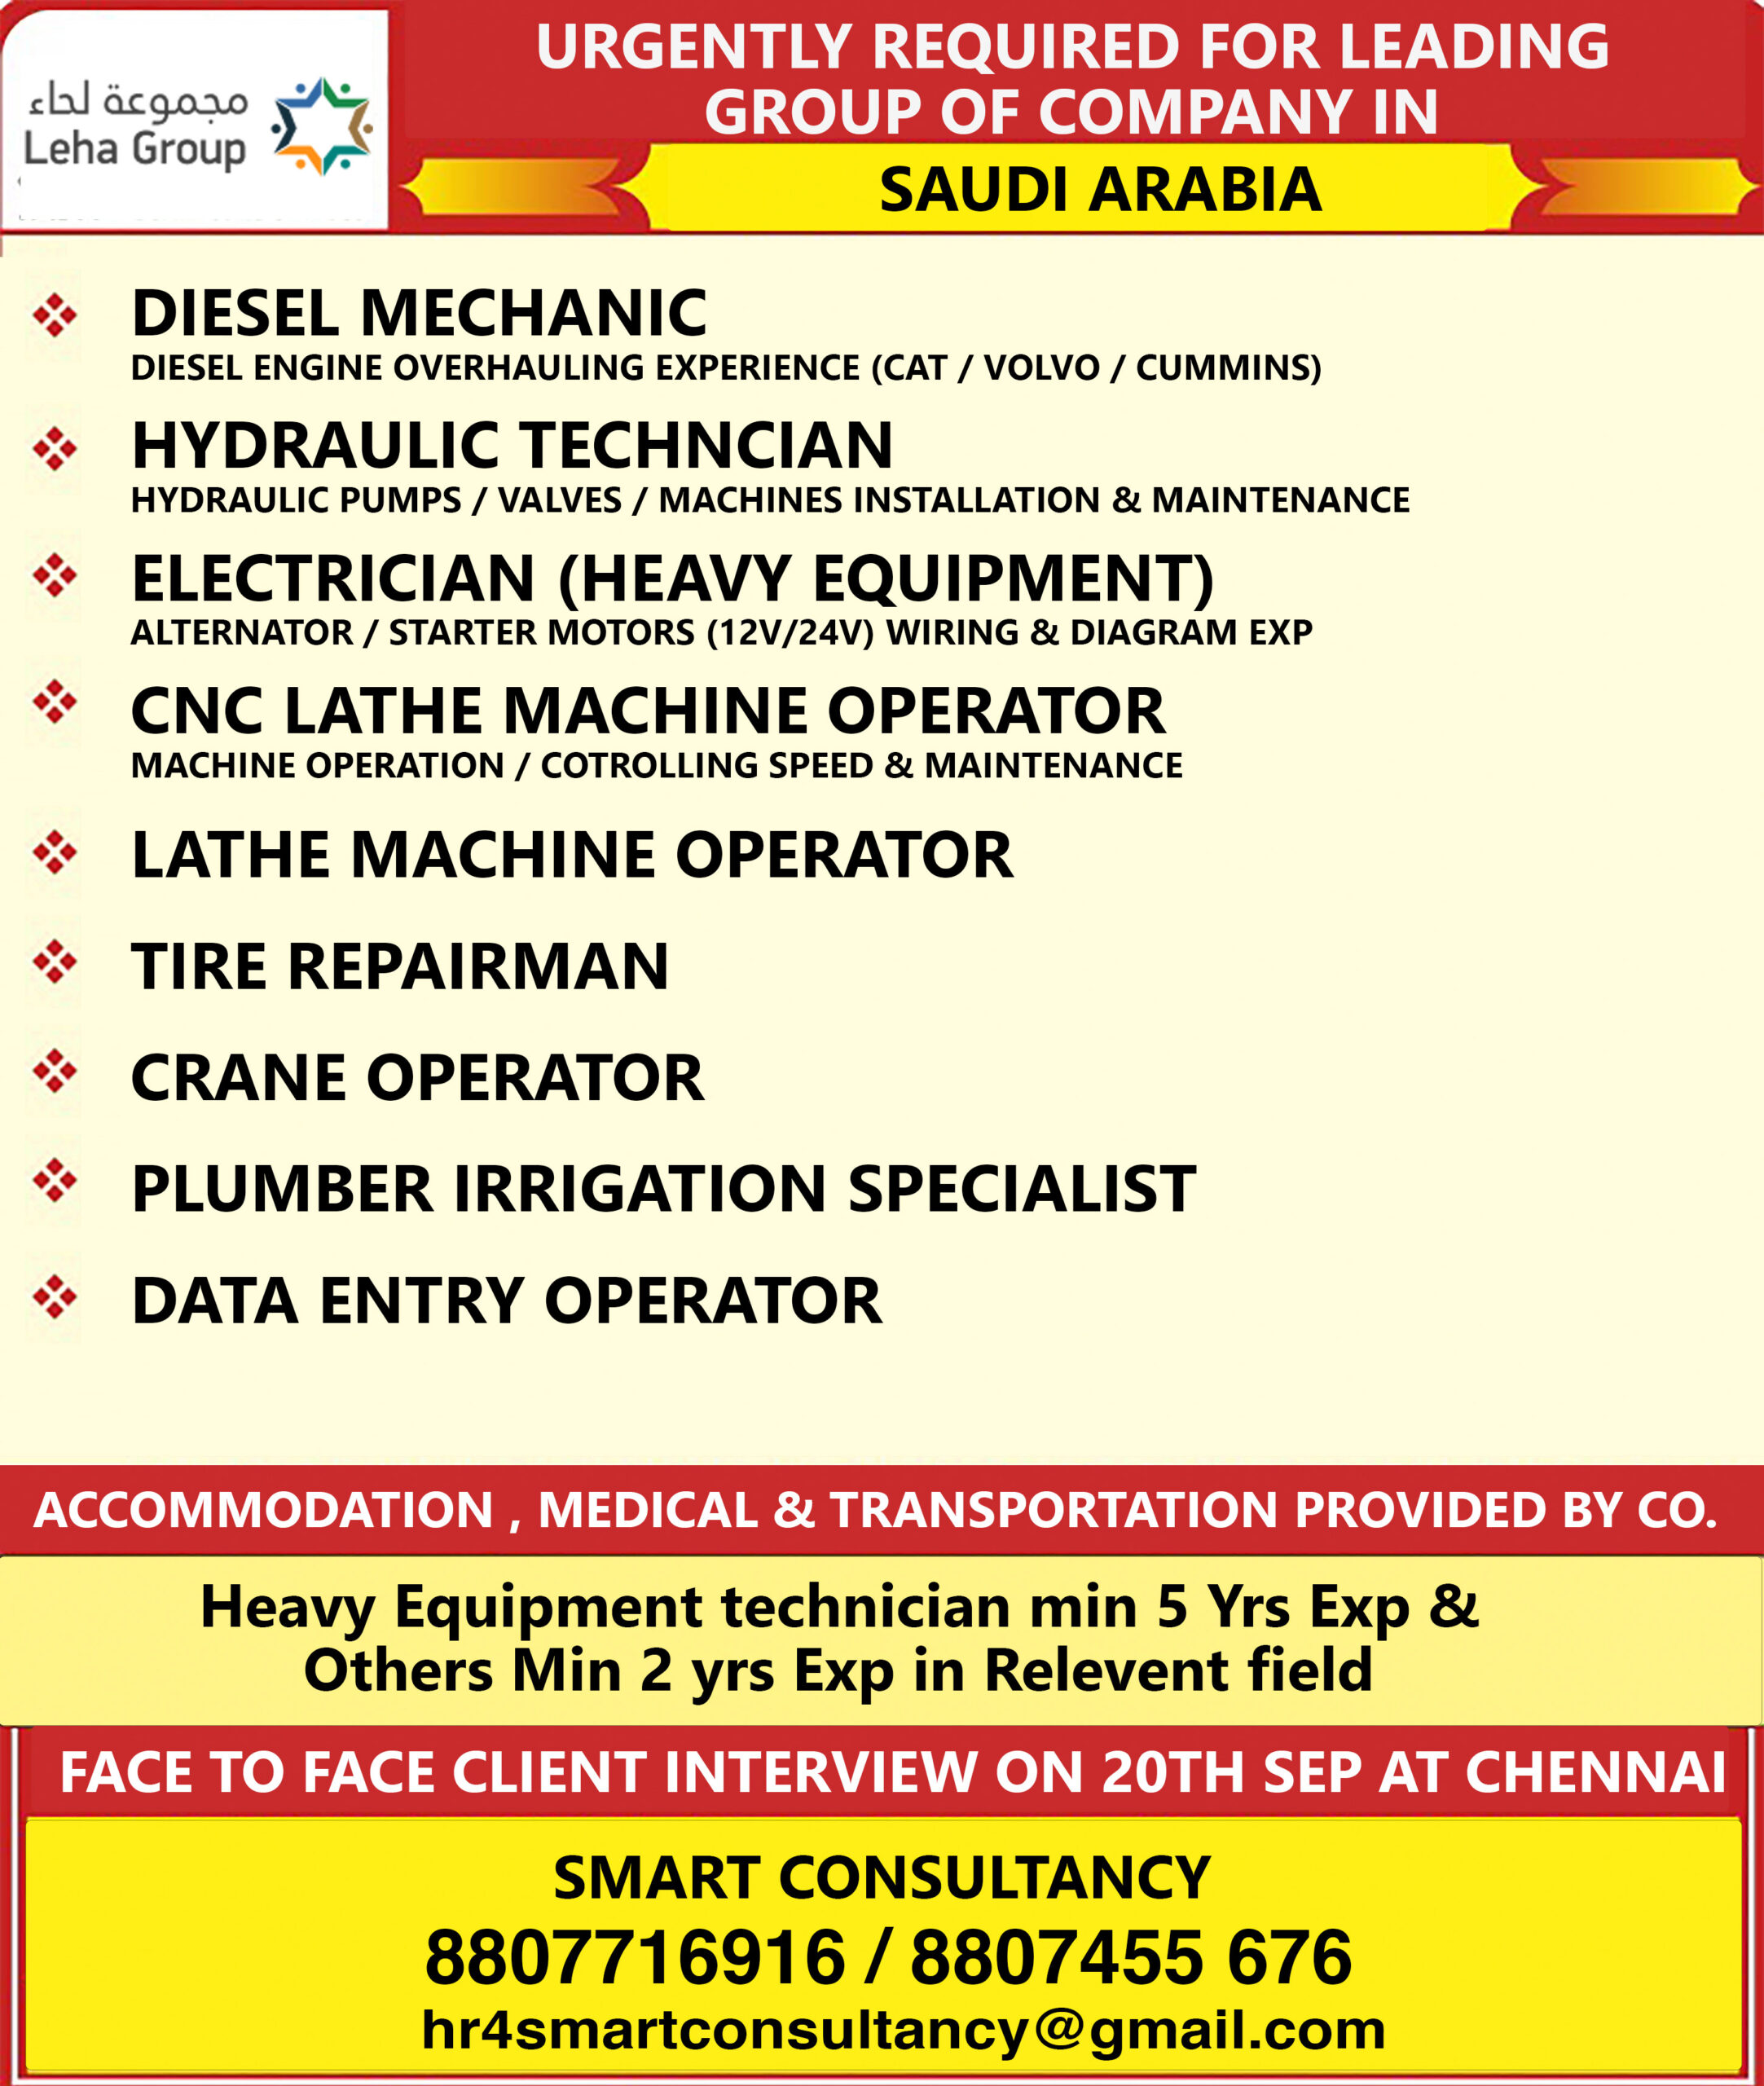 URGENTLY REQUIRED FOR LEADING GROUP OF COMPANY IN SAUDI ARABIA 🇸🇦🇸🇦 Leha Group – FACE TO FACE CLIENT INTERVIEW ON 20TH SEP AT CHENNAI.